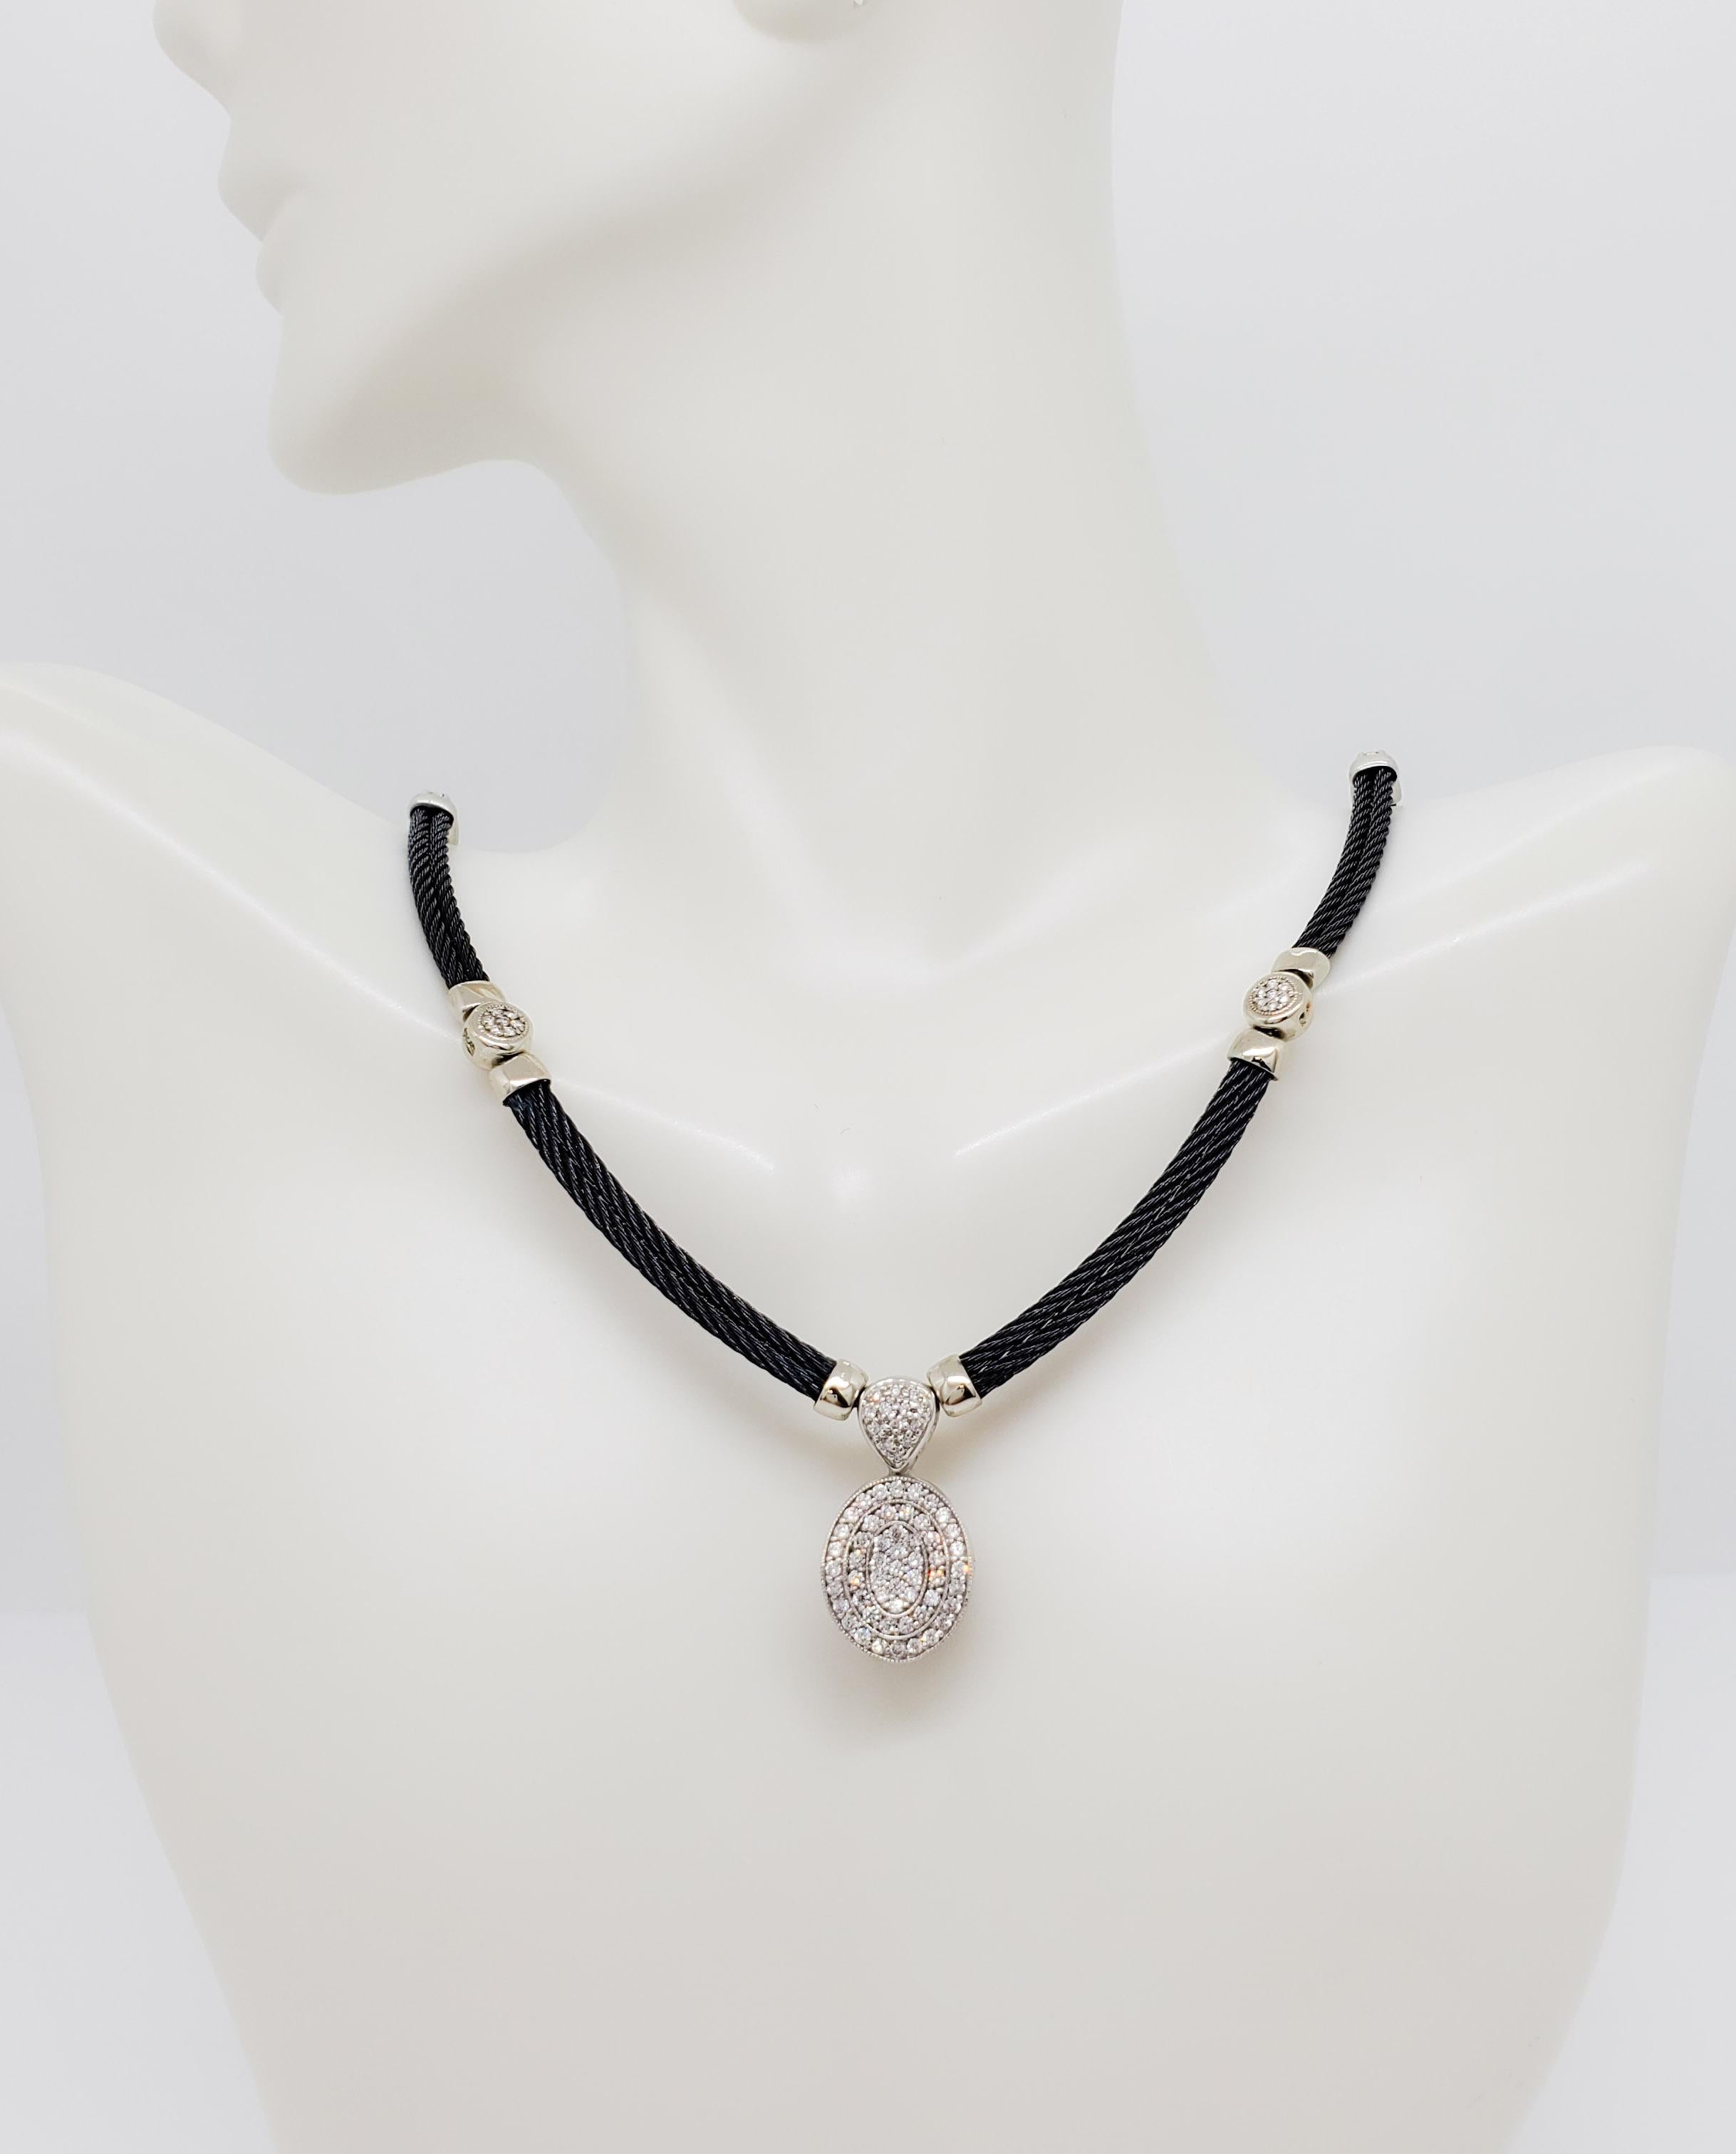 Beautiful estate Charriol necklace.  Good quality white diamond rounds on a black steel cable necklace.  18k white gold.